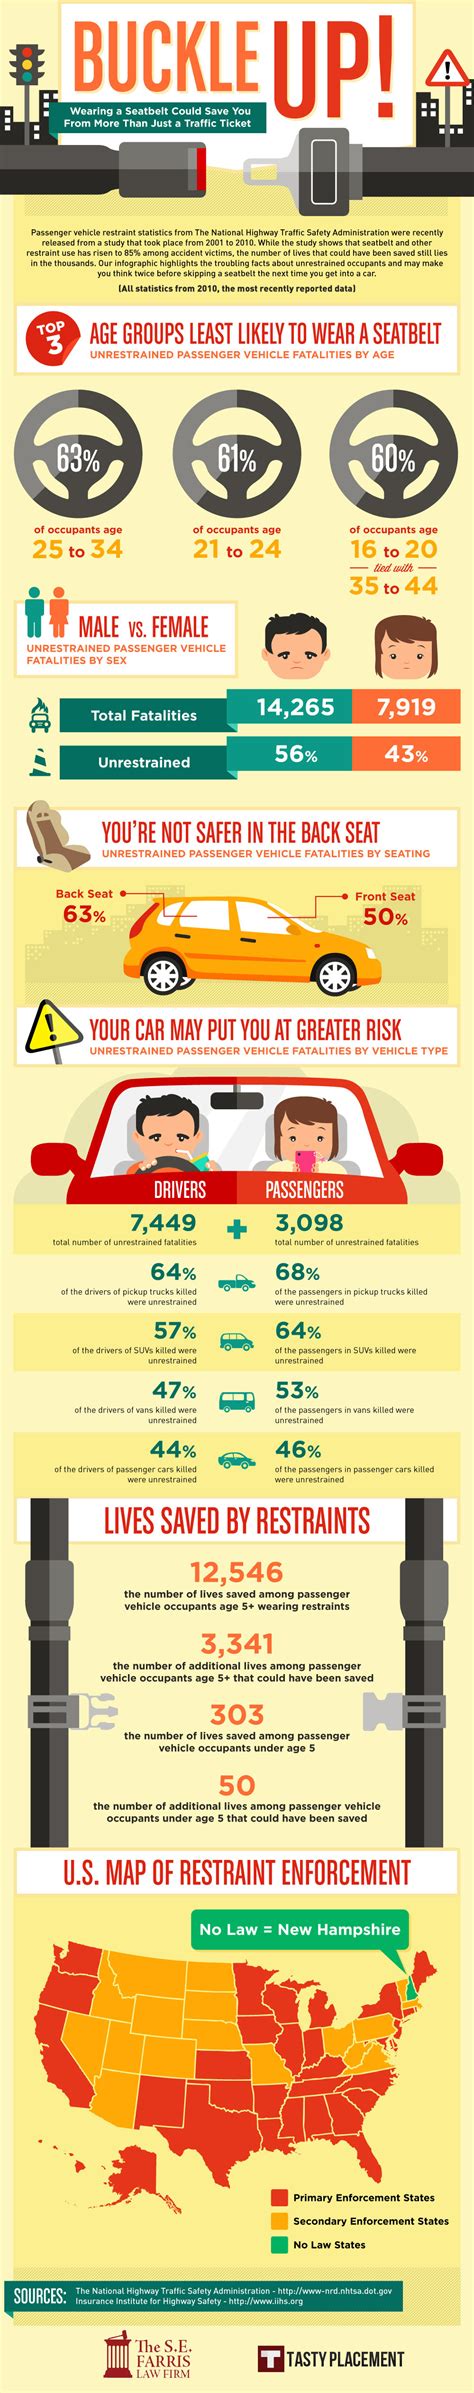 buckle up wearing a seatbelt could save you more from than just a traffic ticket [infographic